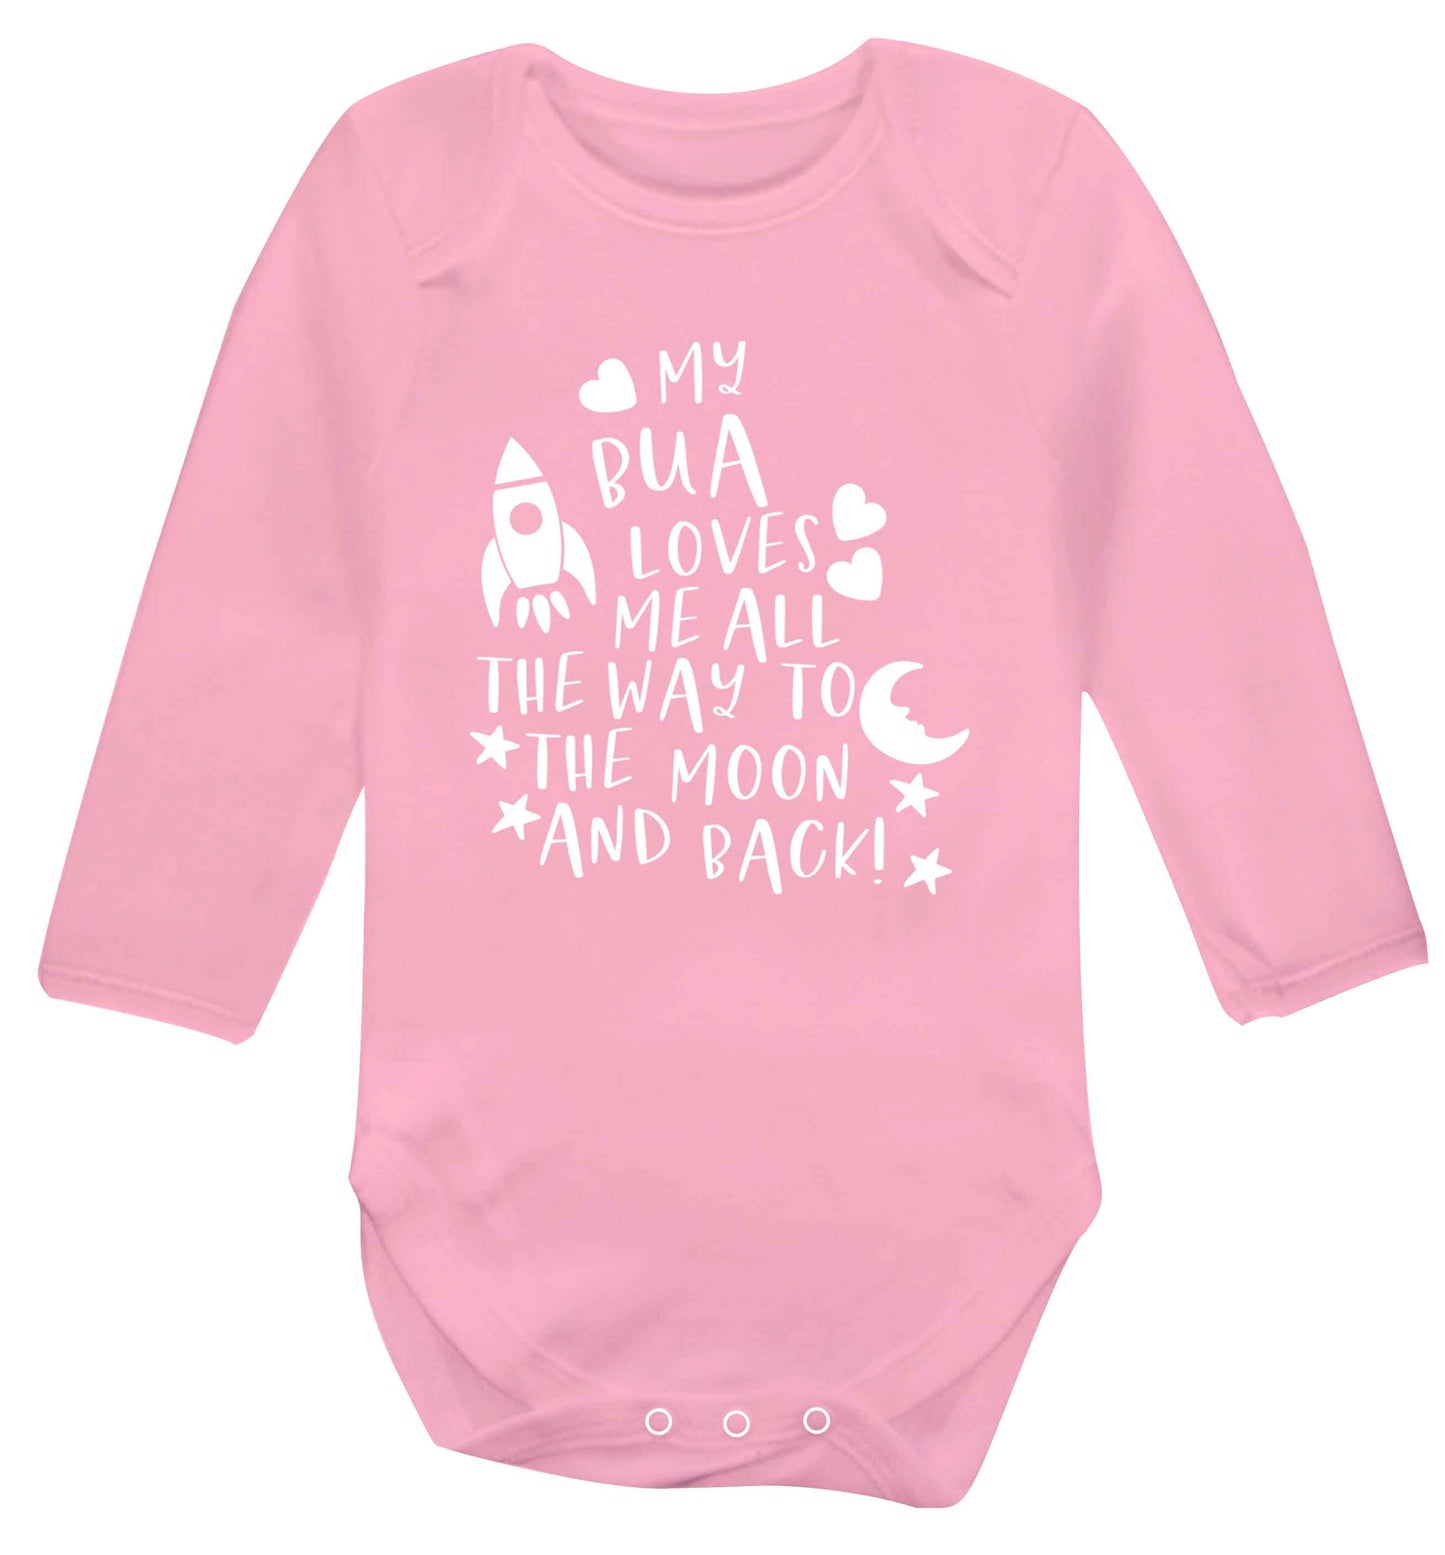 My bua loves me all they way to the moon and back Baby Vest long sleeved pale pink 6-12 months